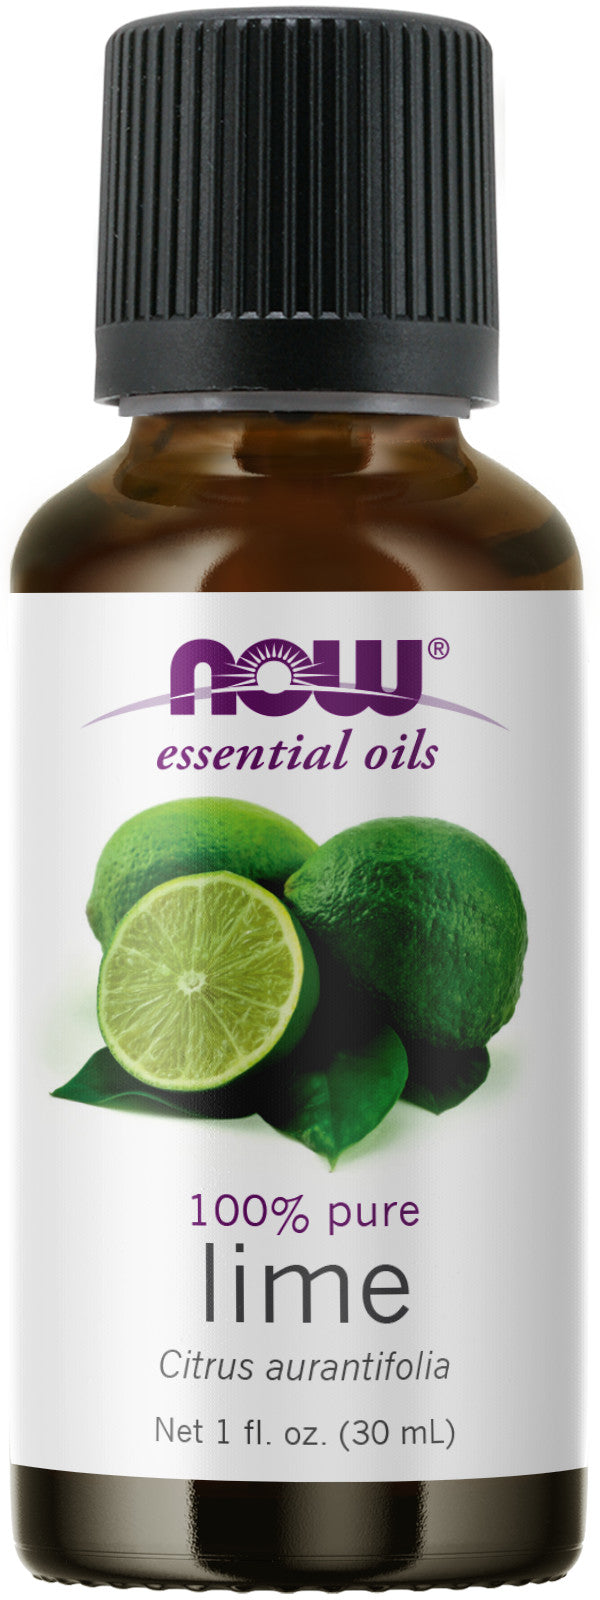 NOW Essential Oils, Lime Oil, Citrus Aromatherapy Scent, Cold Pressed, 100% Pure, Vegan, Child Resistant Cap, 1-Ounce